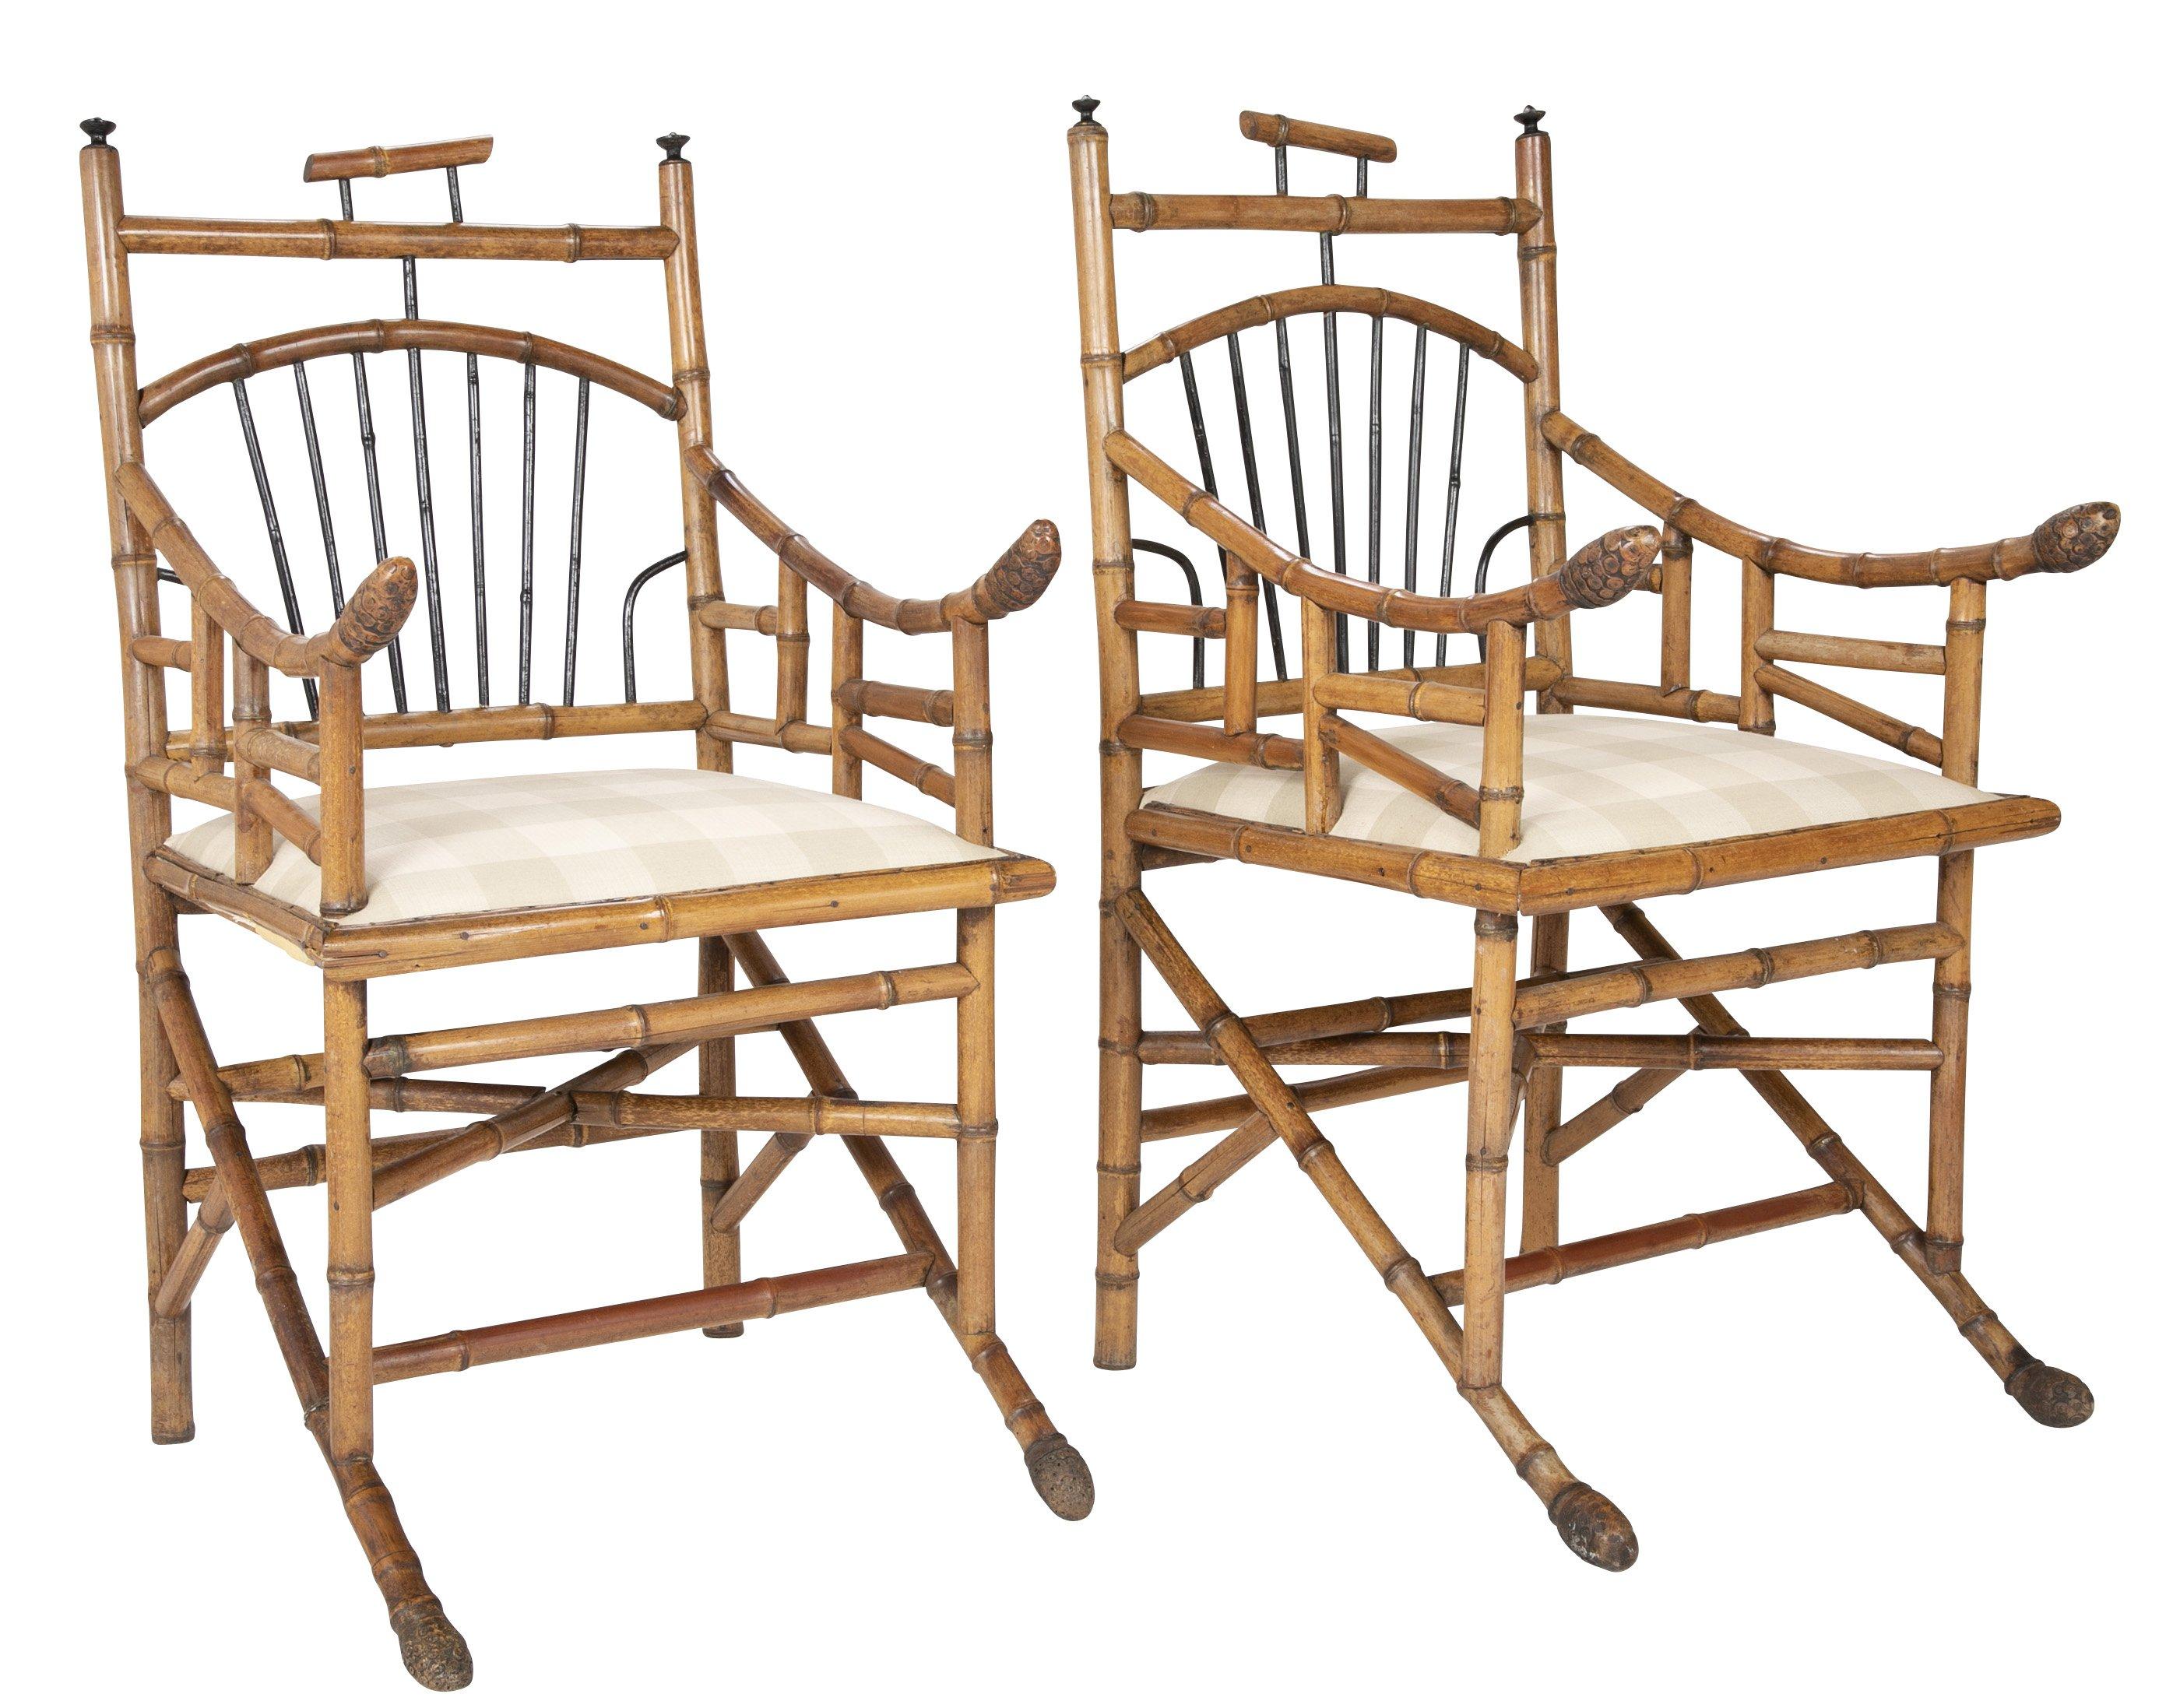 Pair of late 19th century English bamboo armchairs with ebonized spindles and intricate bases.


We are proud of our long-standing partnership with George N Antiques who specializes in fine authentic antique furniture and decorative objects of the